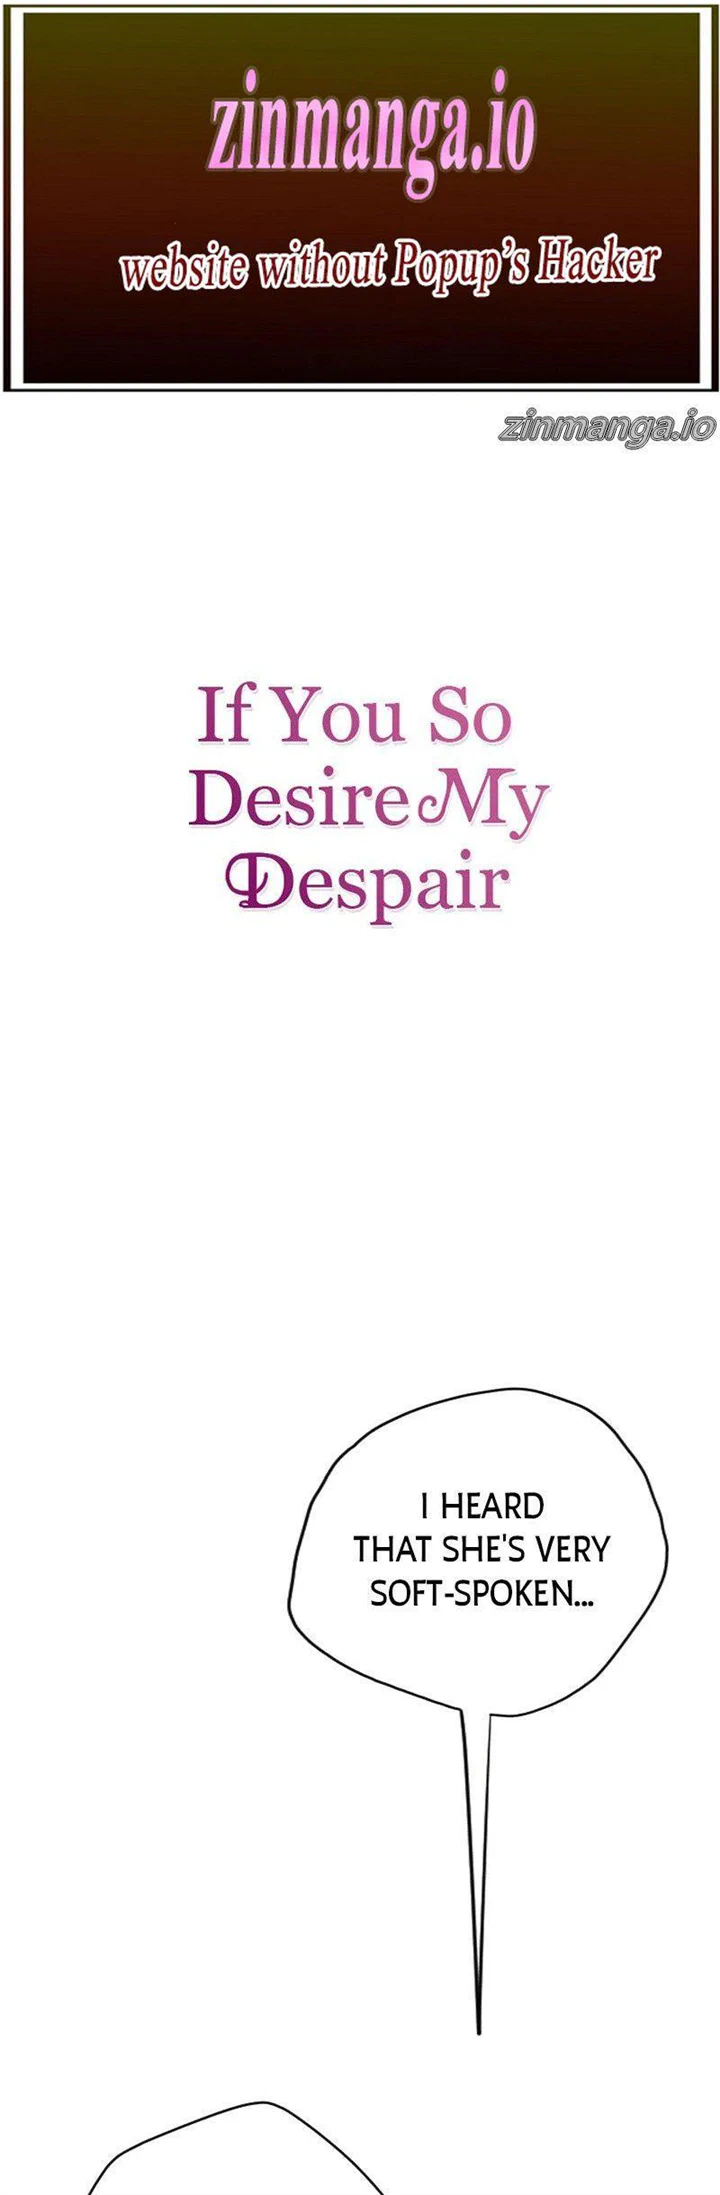 If You Wish For My Despair - Page 2